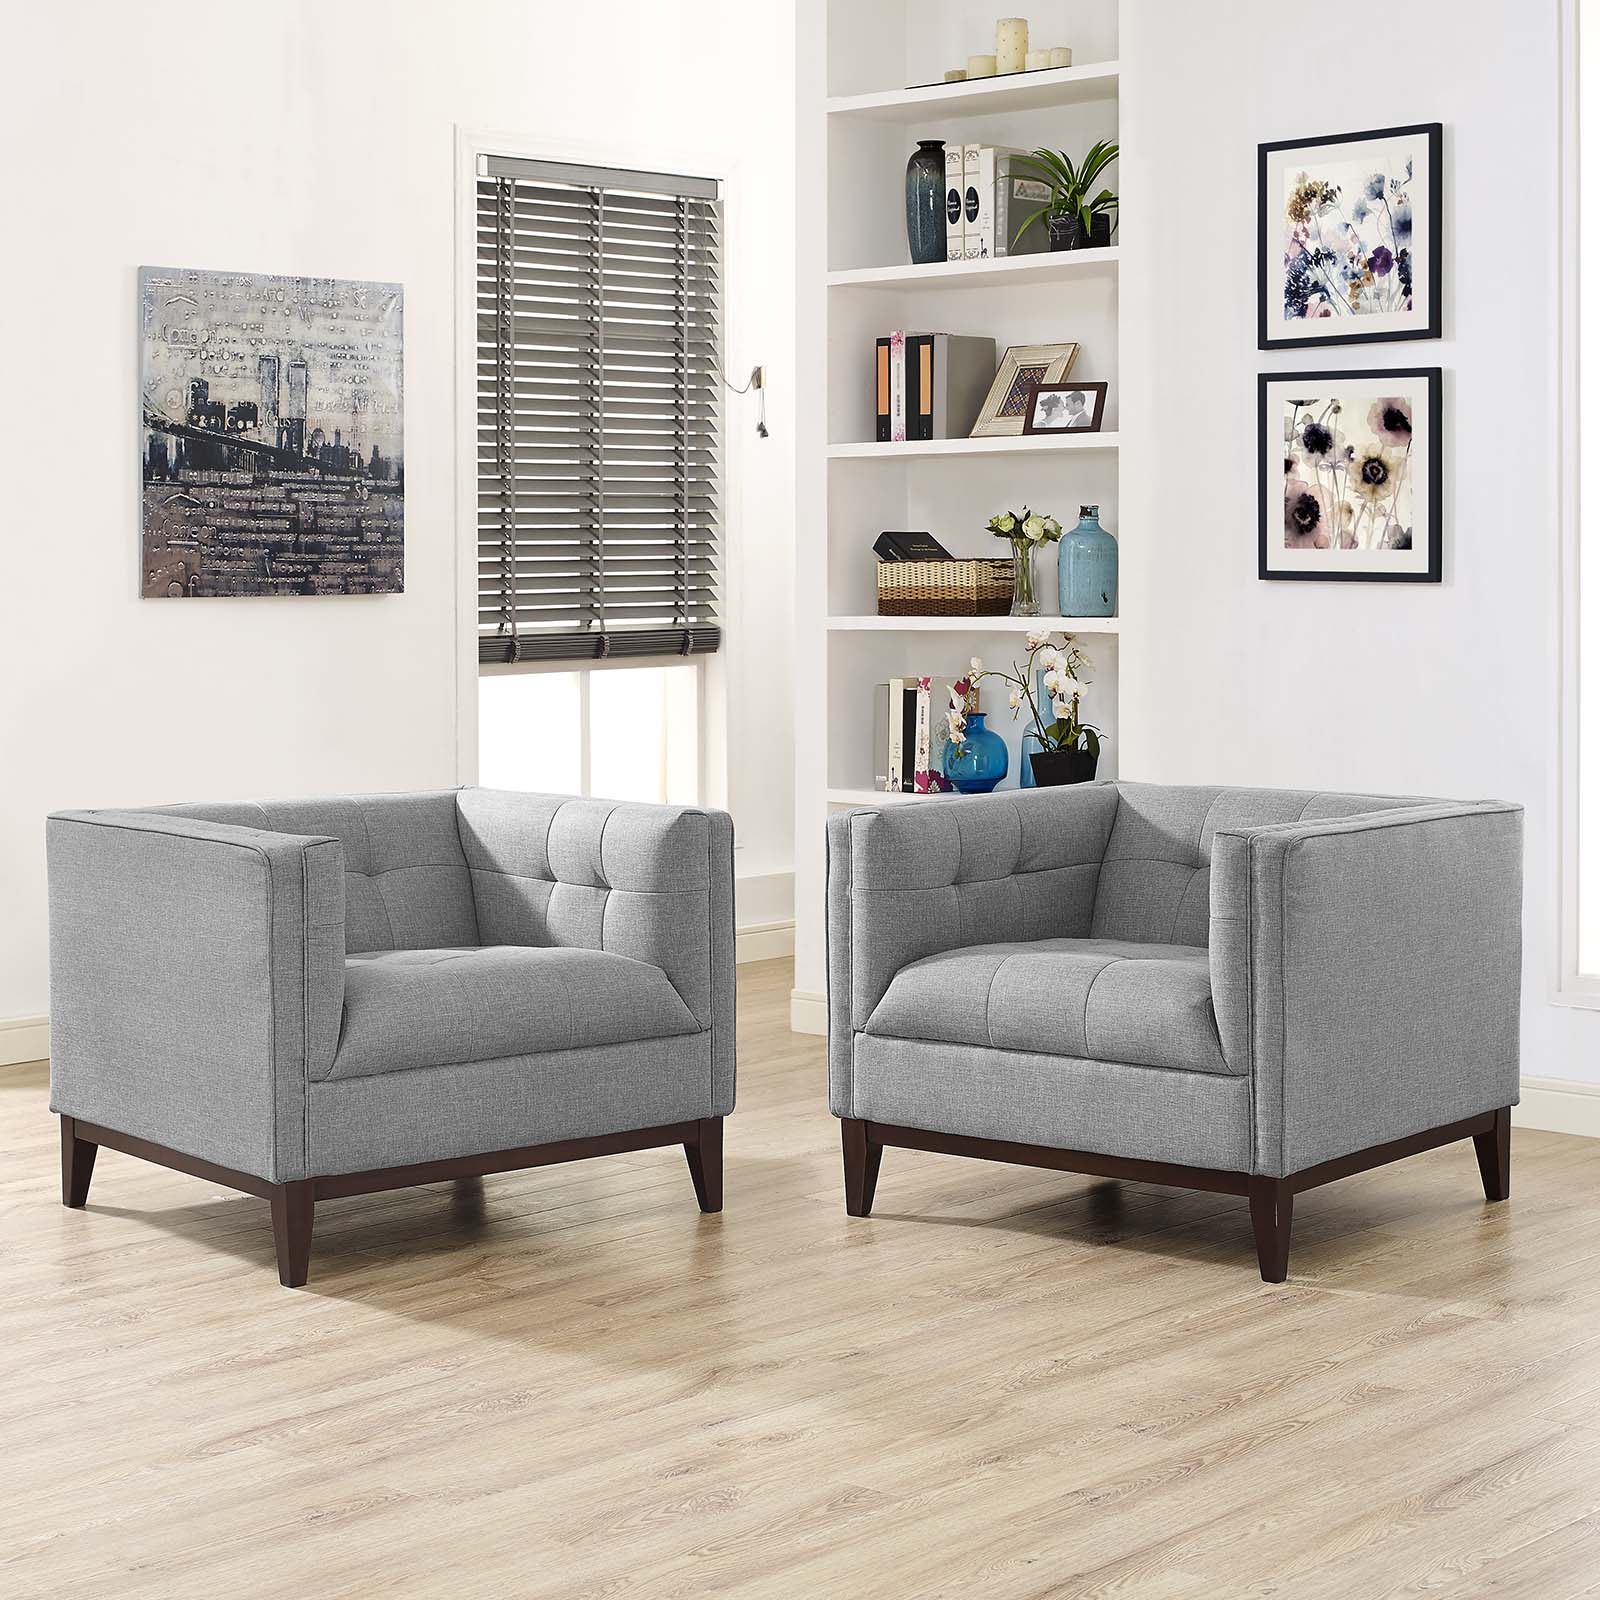 Serve Armchairs Set of 2 - East Shore Modern Home Furnishings